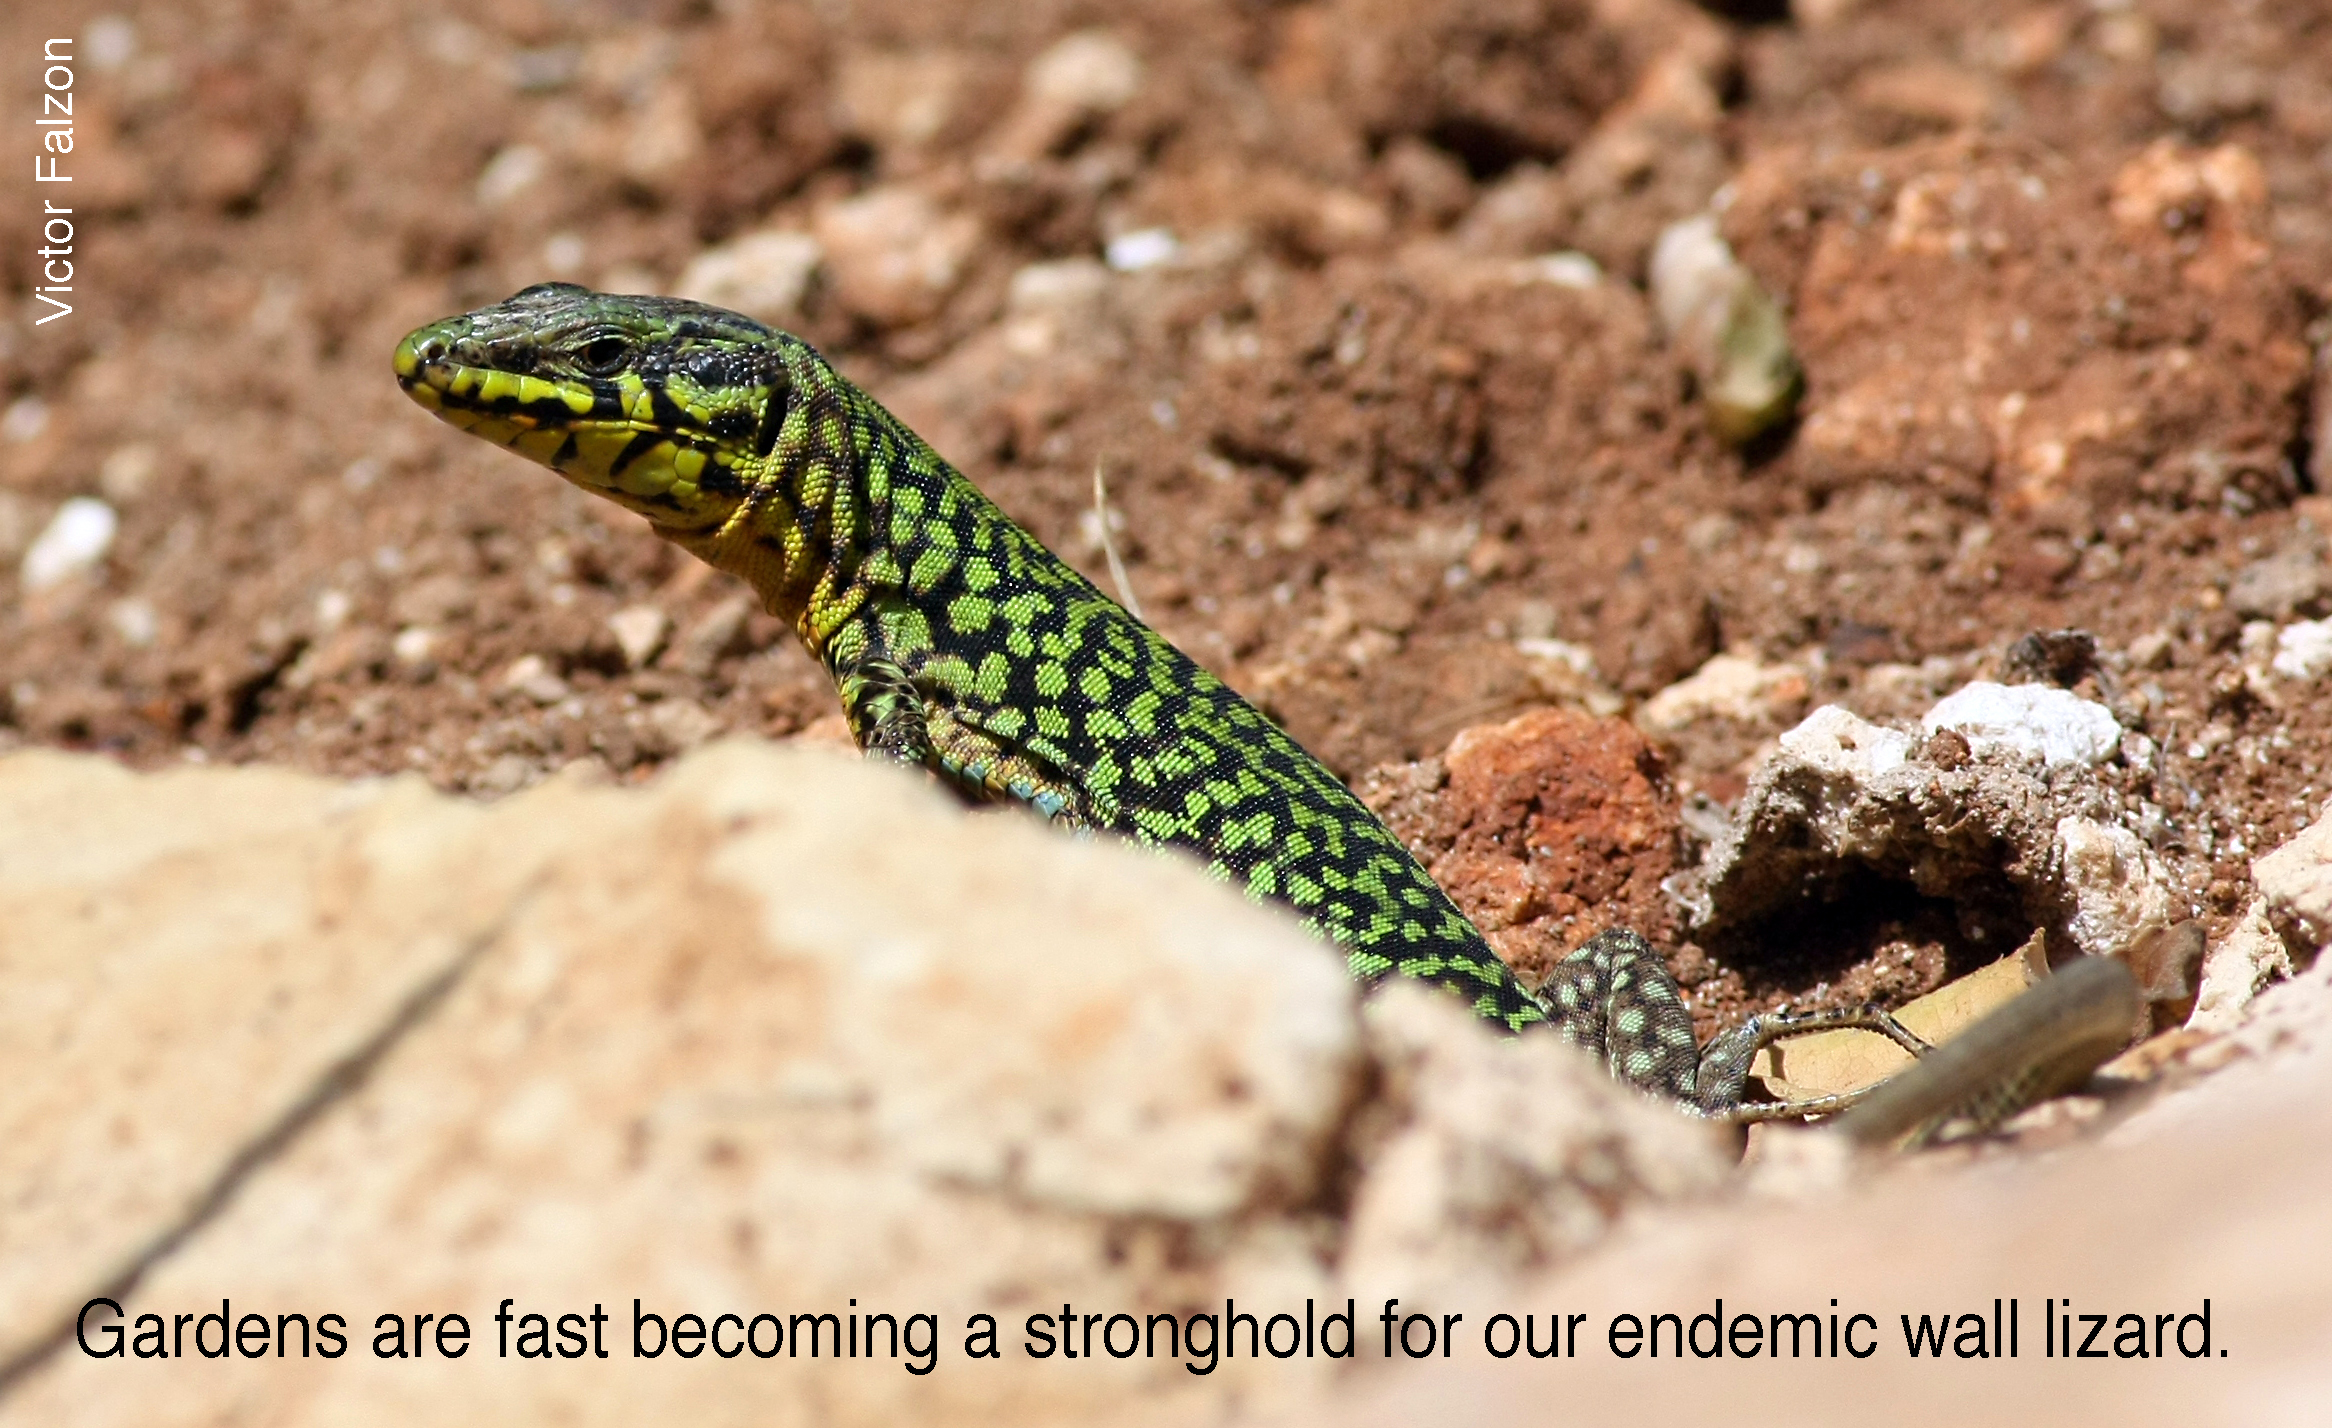 Gardens are fast becoming a stronghold for our endemic wall lizard.